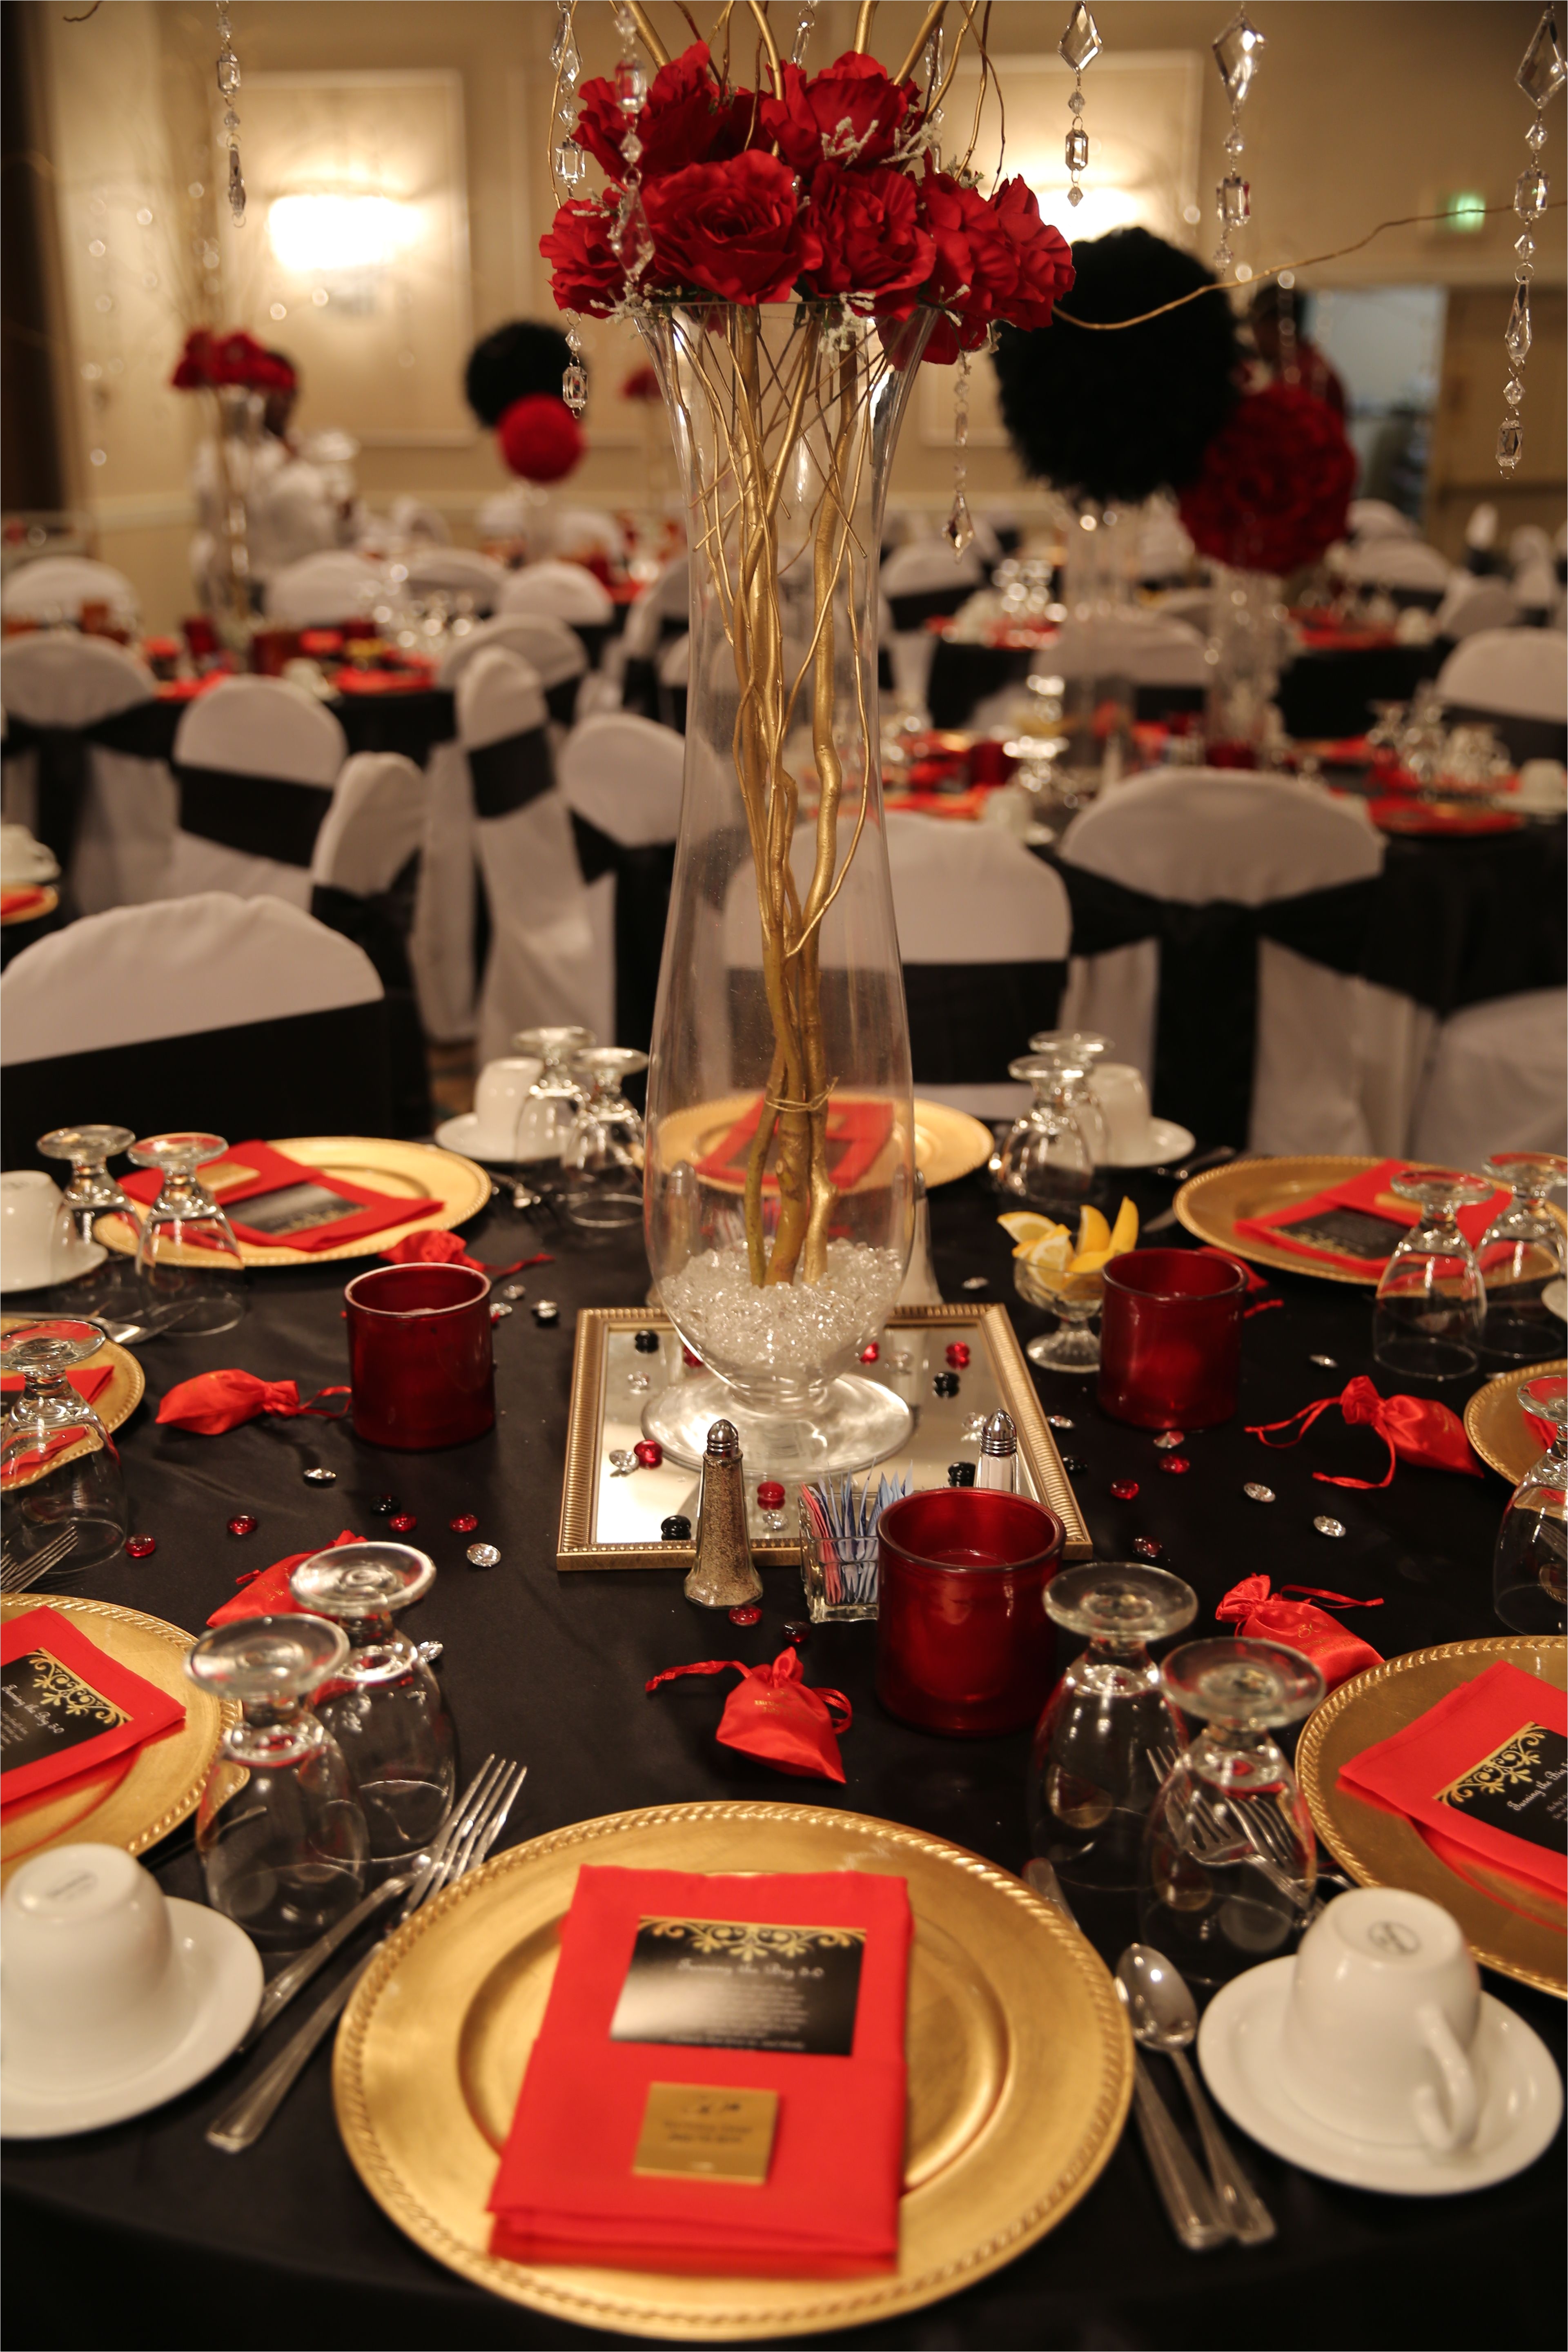 Black and Gold 65th Birthday Decorations Red Black and Gold Table Decorations for 50th Birthday Party Red